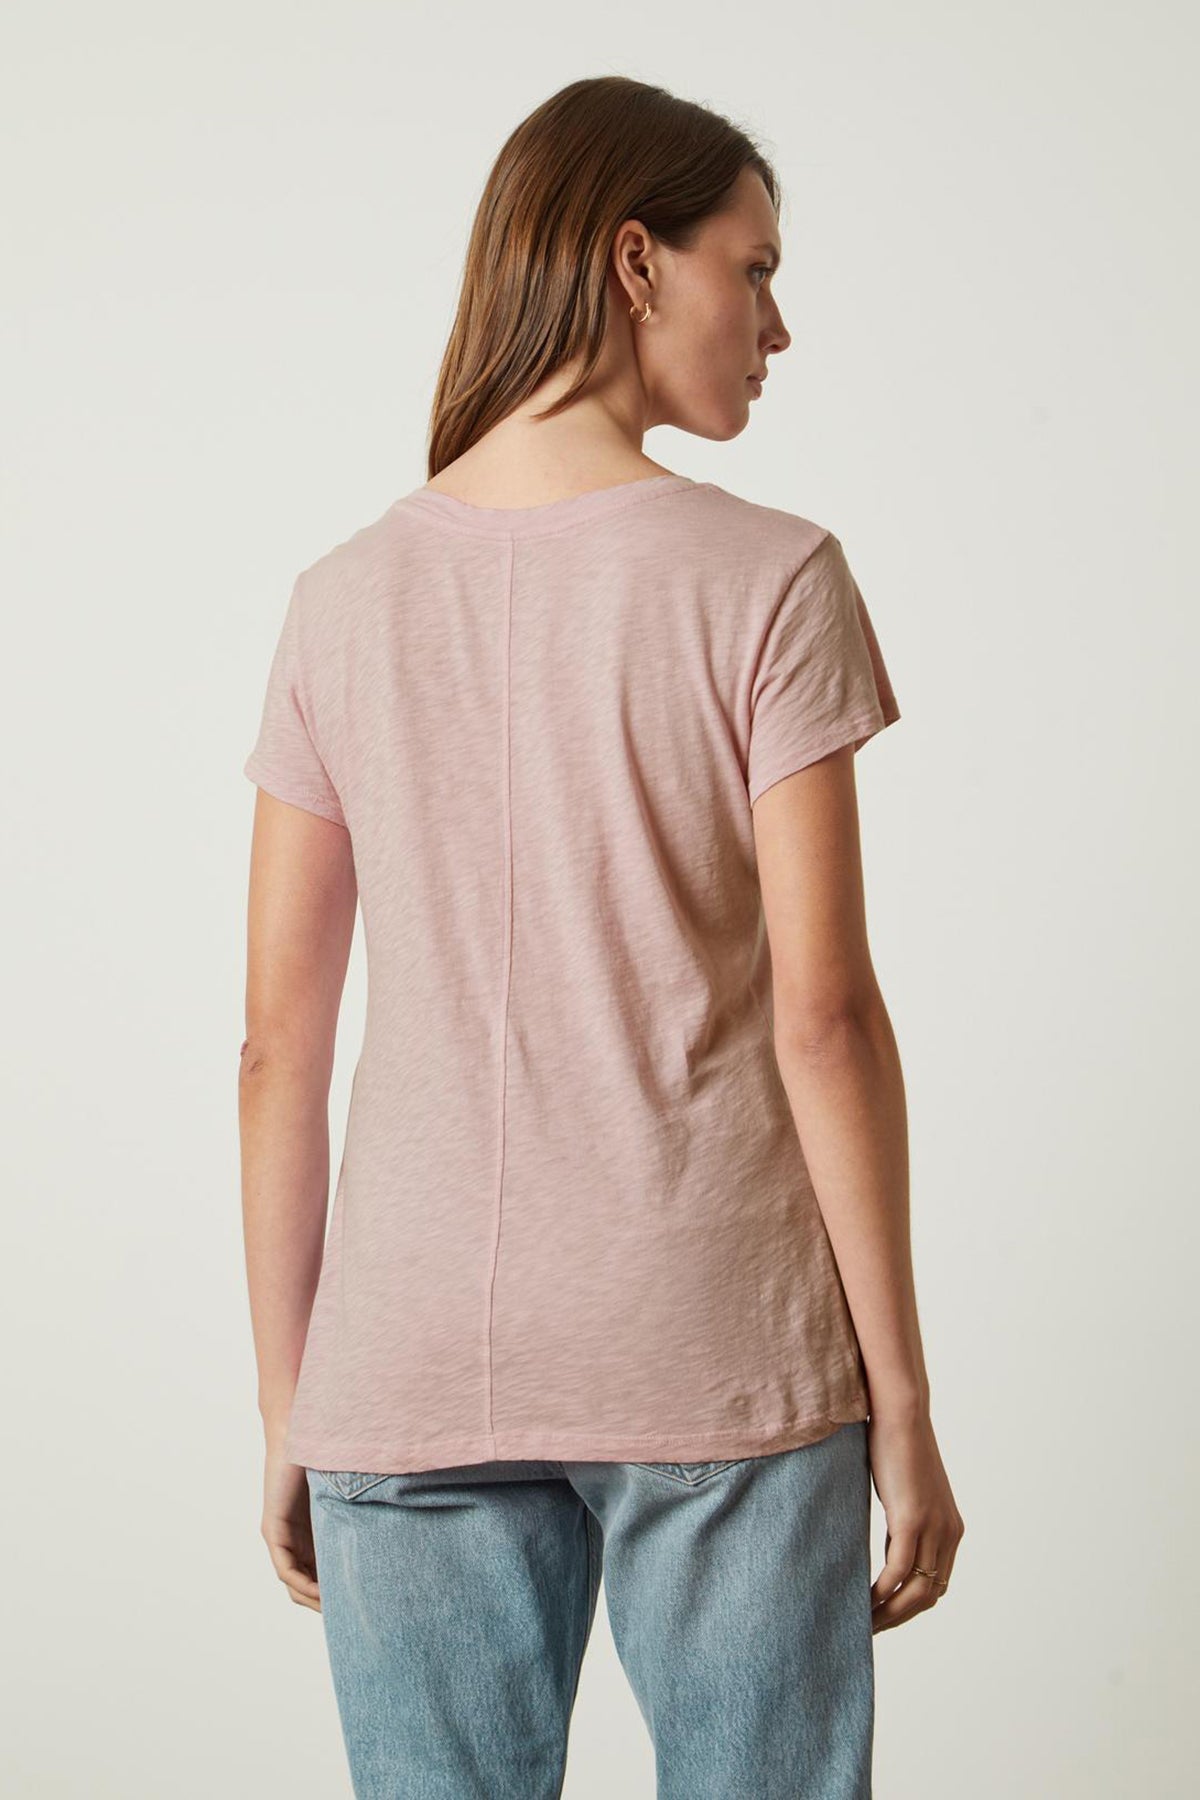 The back view of a woman wearing a Velvet by Graham & Spencer ODELIA COTTON SLUB CREW NECK TEE.-35567694151873